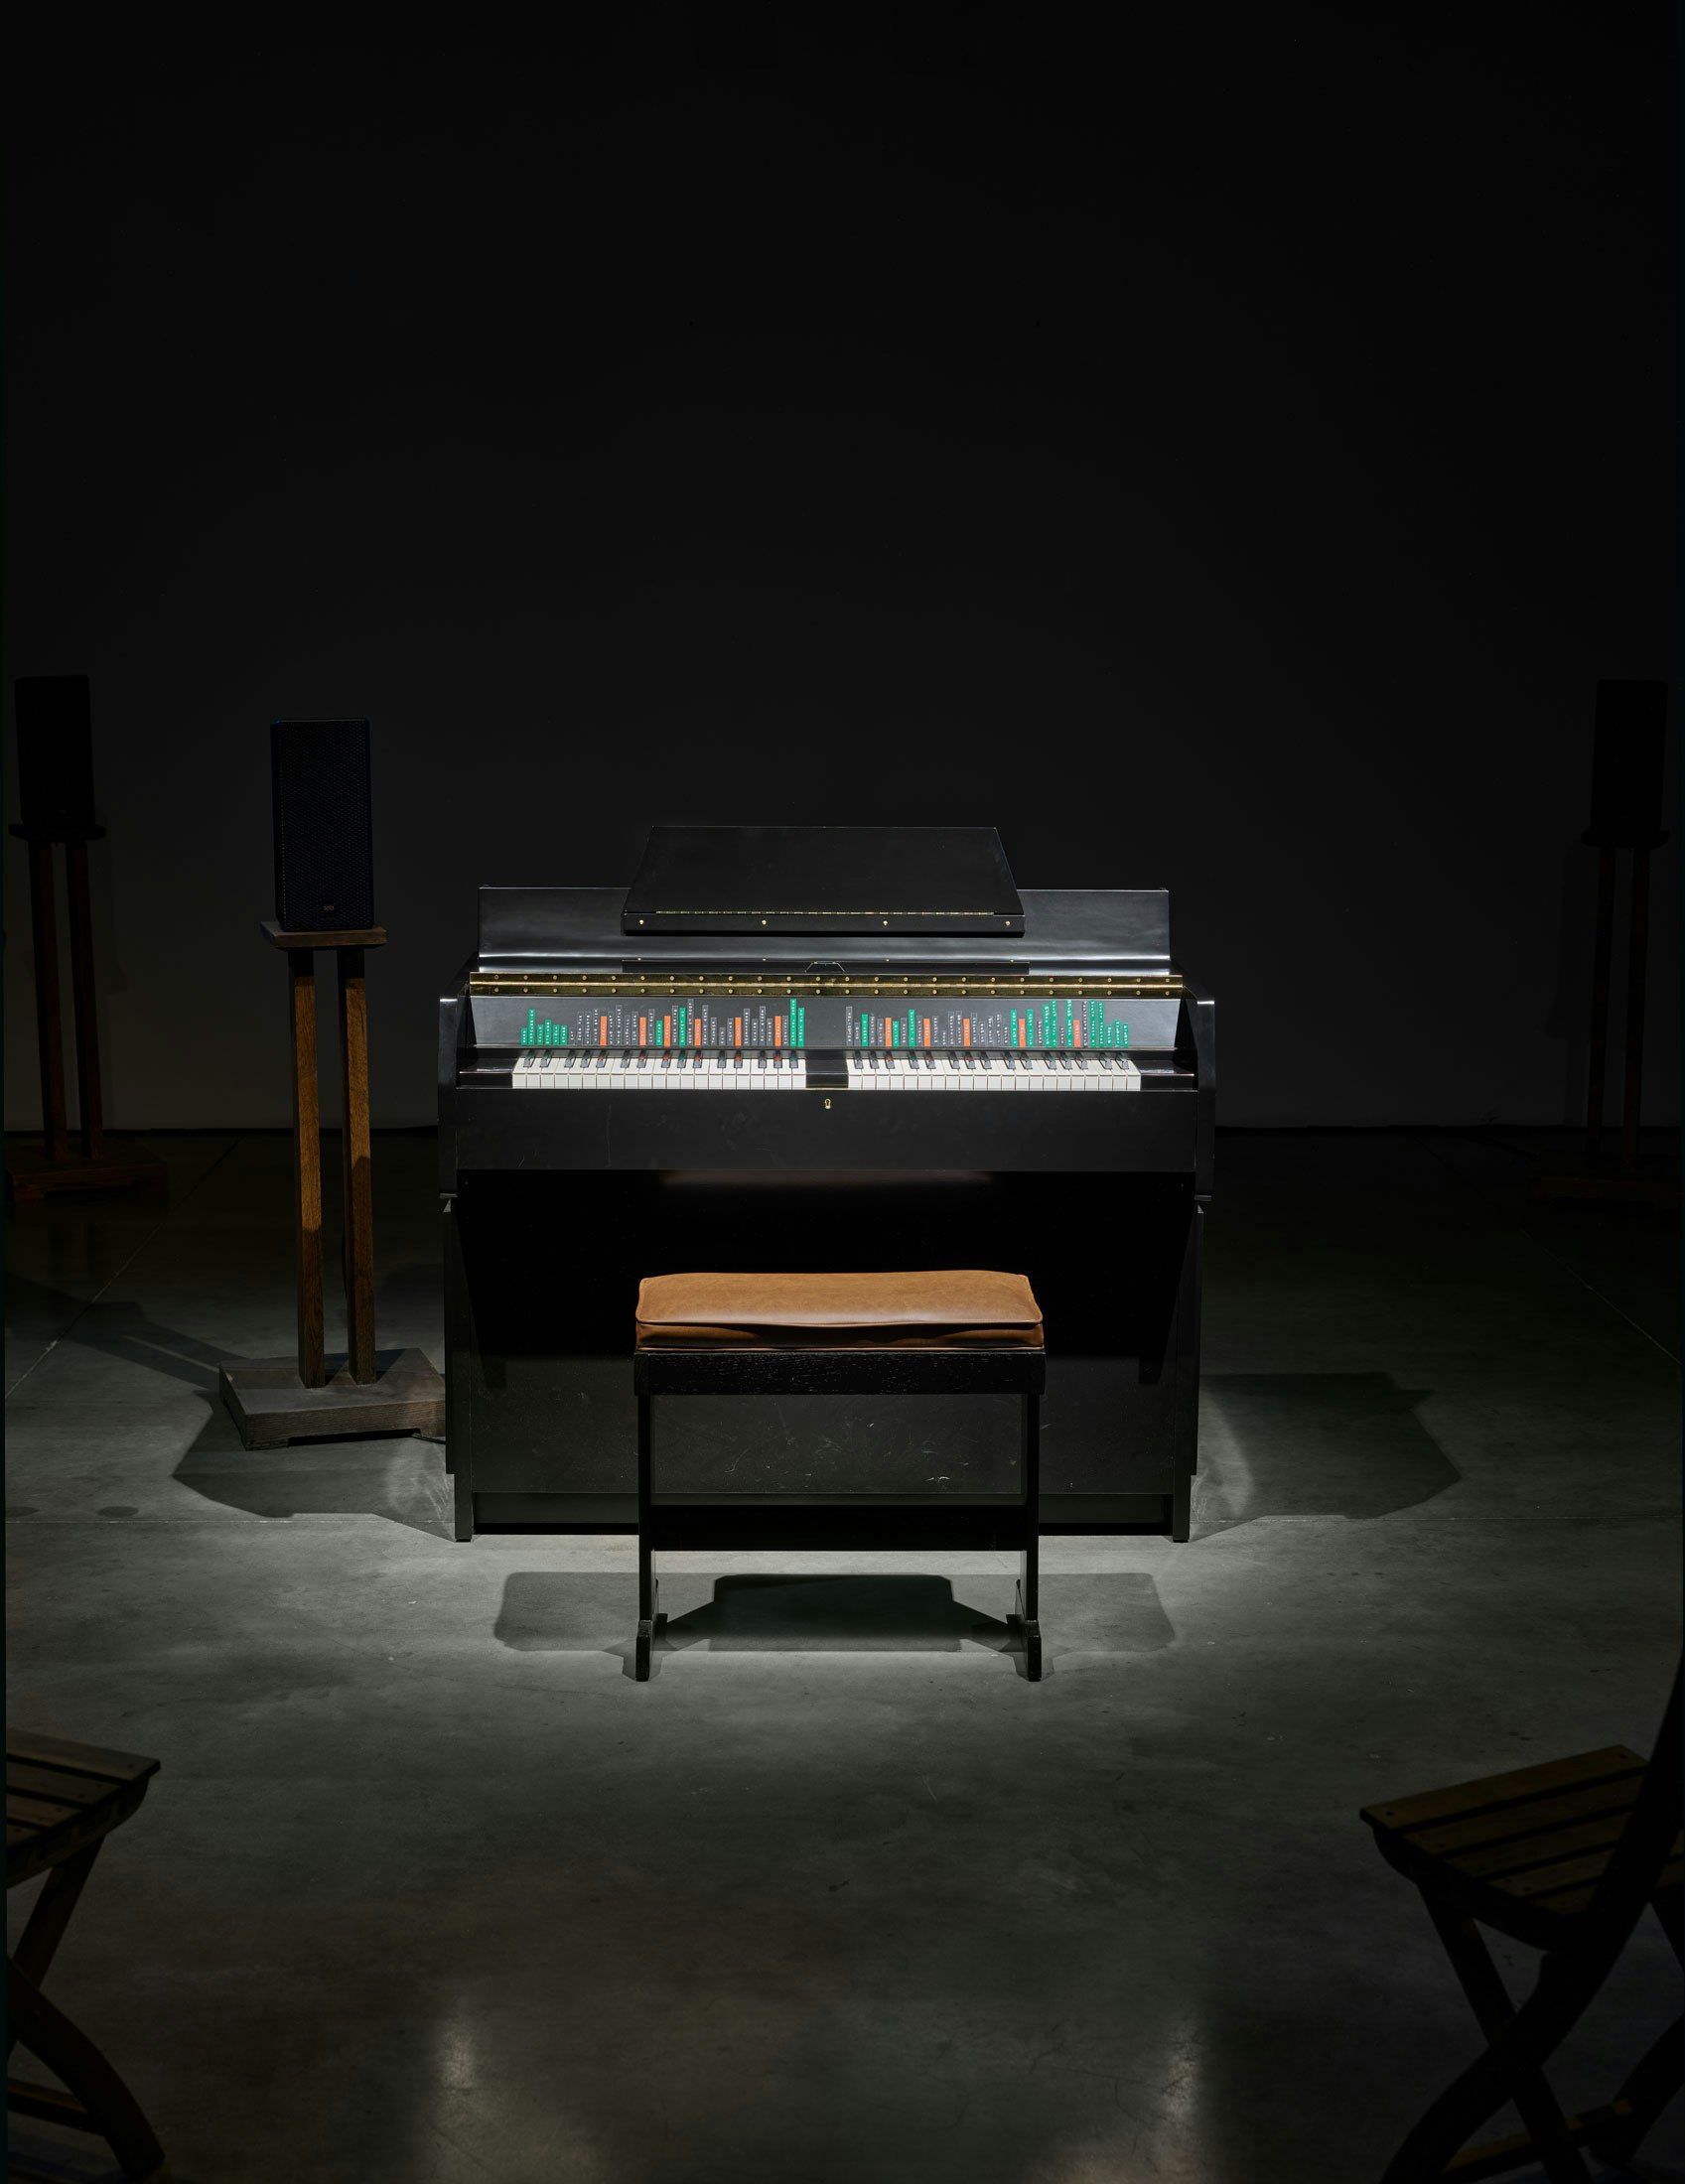 Janet Cardiff and George Bures Miller, <em>The Instrument of Troubled Dreams</em>, 2018. Interactive audio installation with ambisonic soundDimensions variable. Photo: Farzad Owrang. © Janet Cardiff and George Bures Miller; Courtesy of the artists and Luhring Augustine, New York.